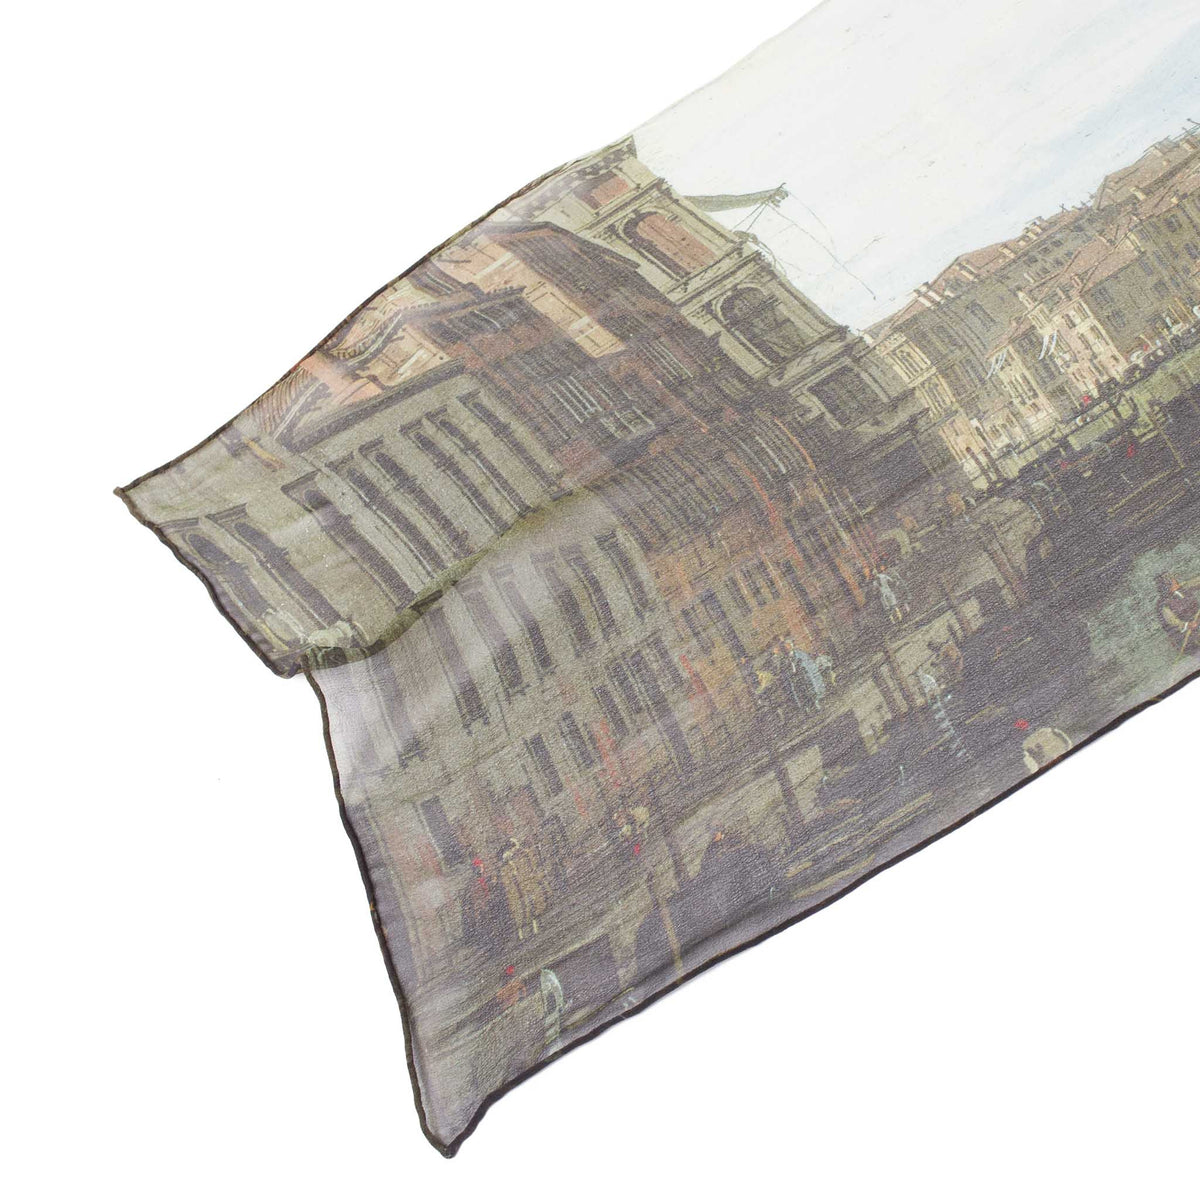 Canaletto-The Grand Canal in Venice-Silk Scarf detail of sheerness | Getty Store